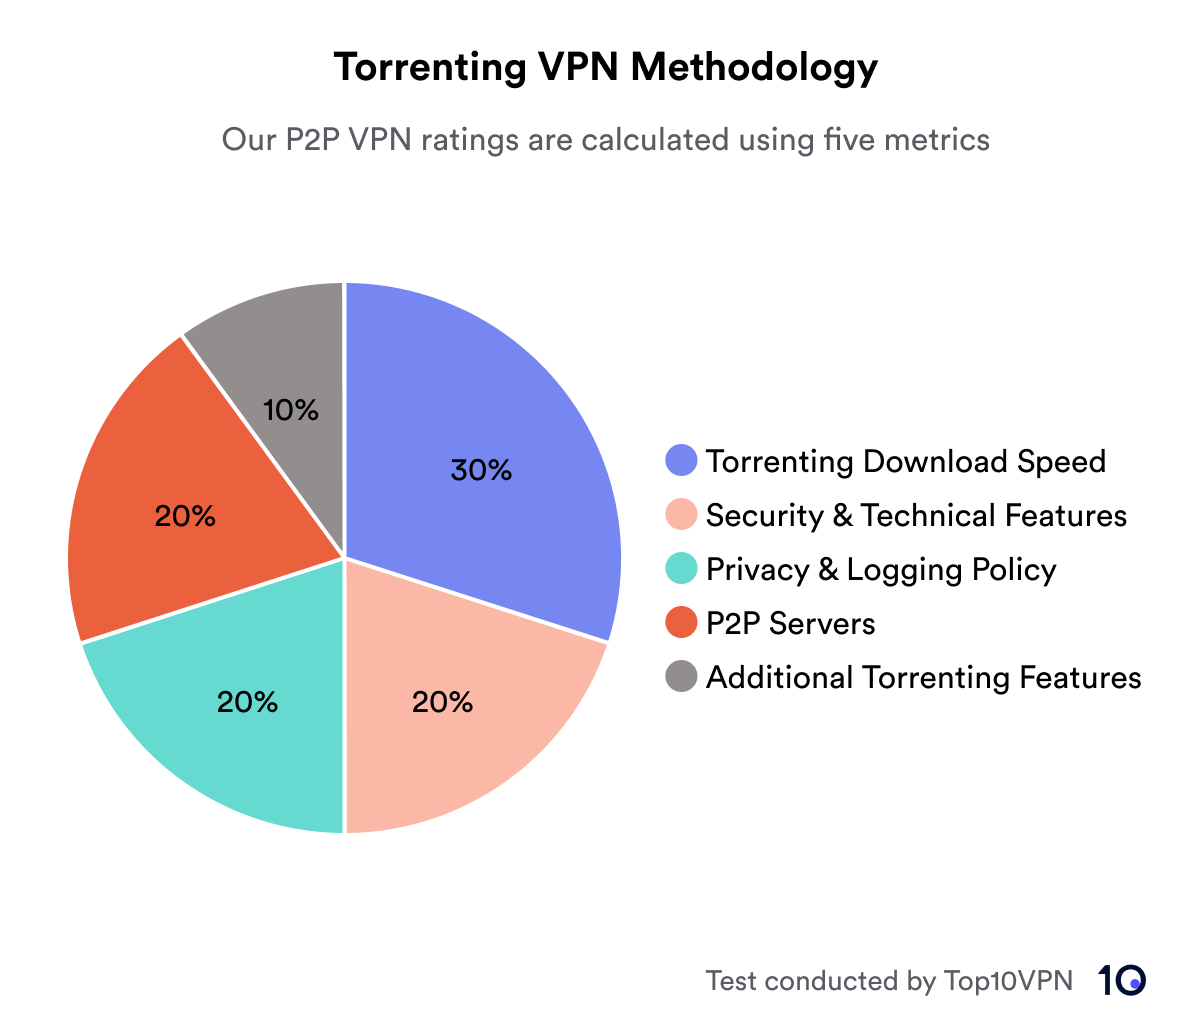 Pie chart showing the breakdown of our torrenting methodology, which calculated using 5 metrics. Torrenting download speed is allocated 30%, security and technical features 20%, privacy and logging policy 20%, p2p servers 20% and additional torrenting features 10%